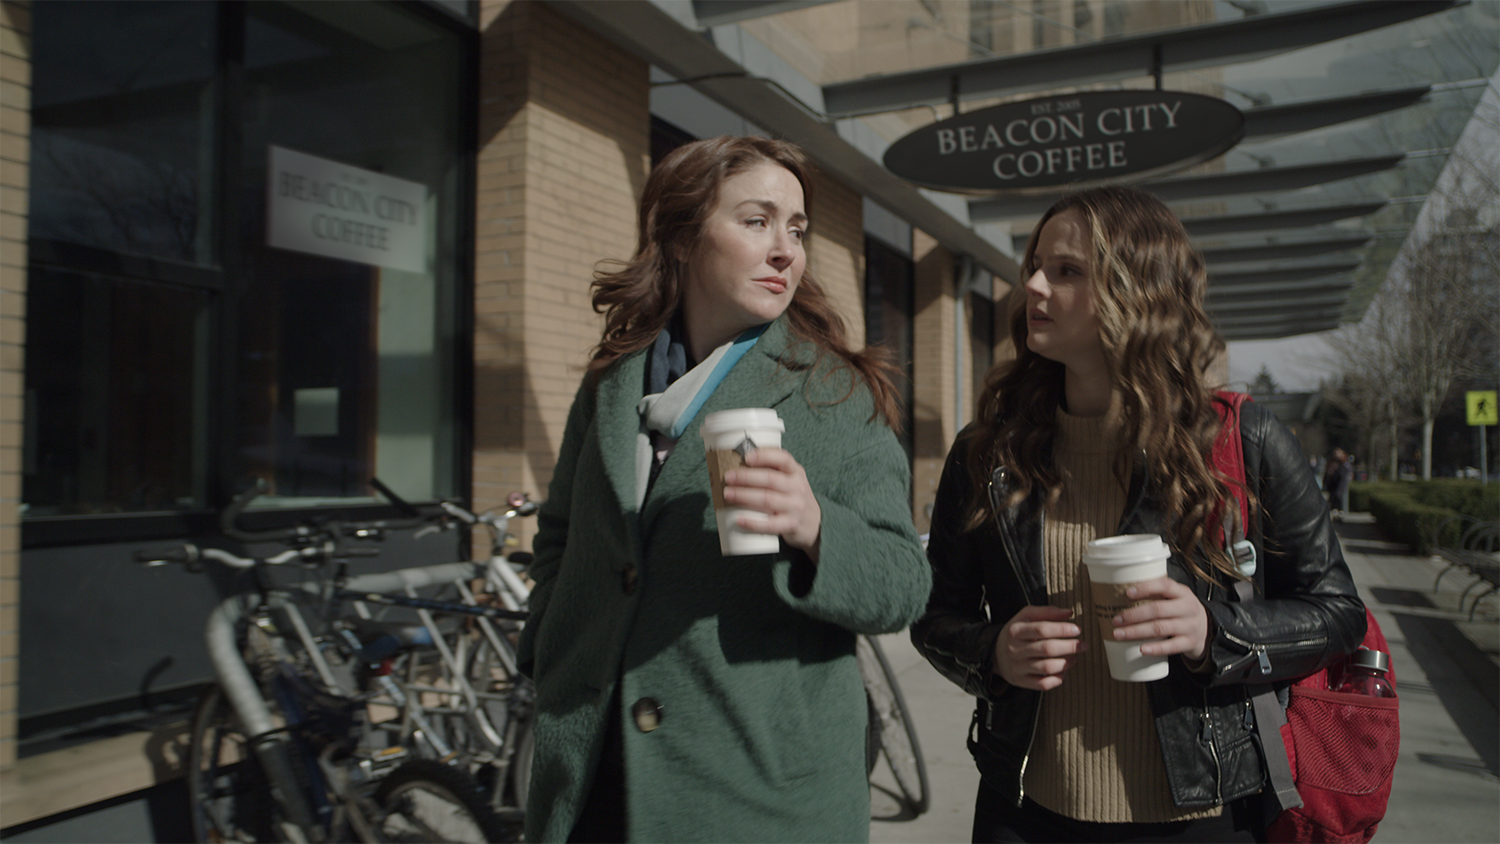 Actresses walk outside a re-branded coffee shop in the film Past Never Dies, with VFX completed by Foxtrot X-Ray